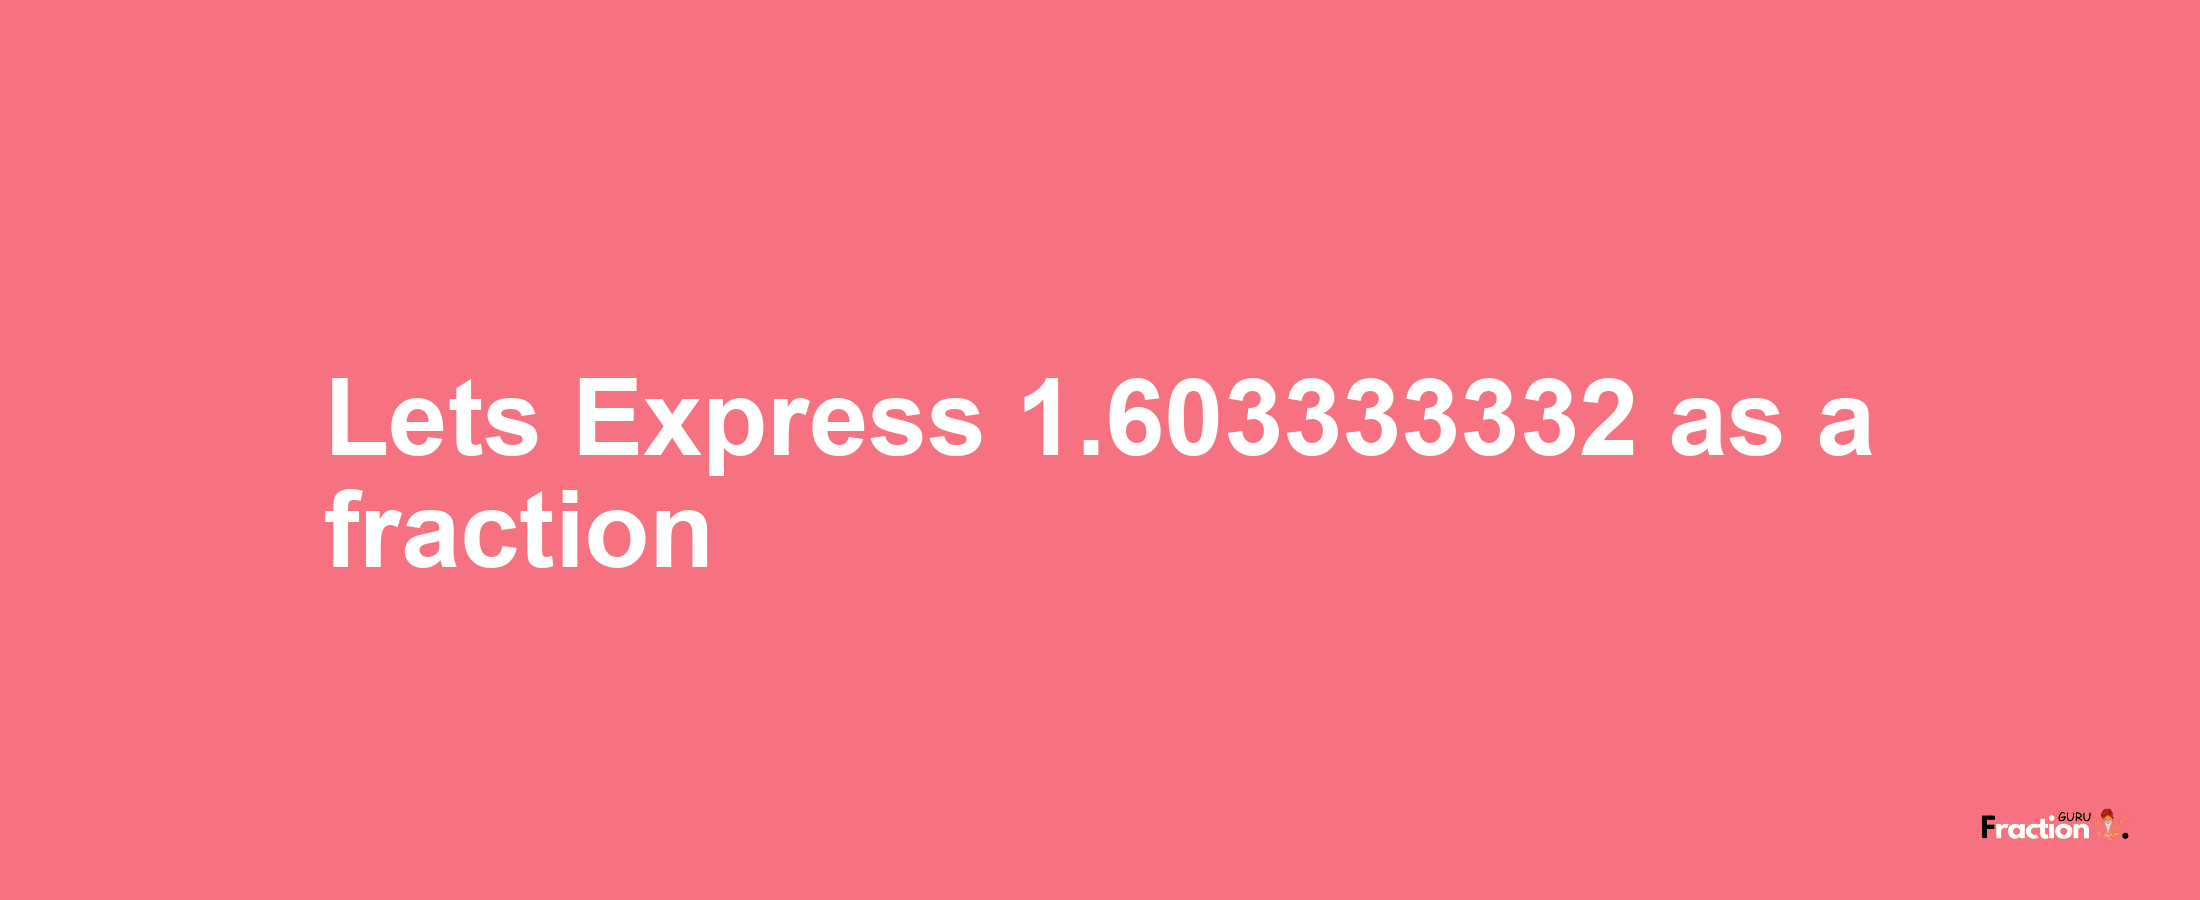 Lets Express 1.603333332 as afraction